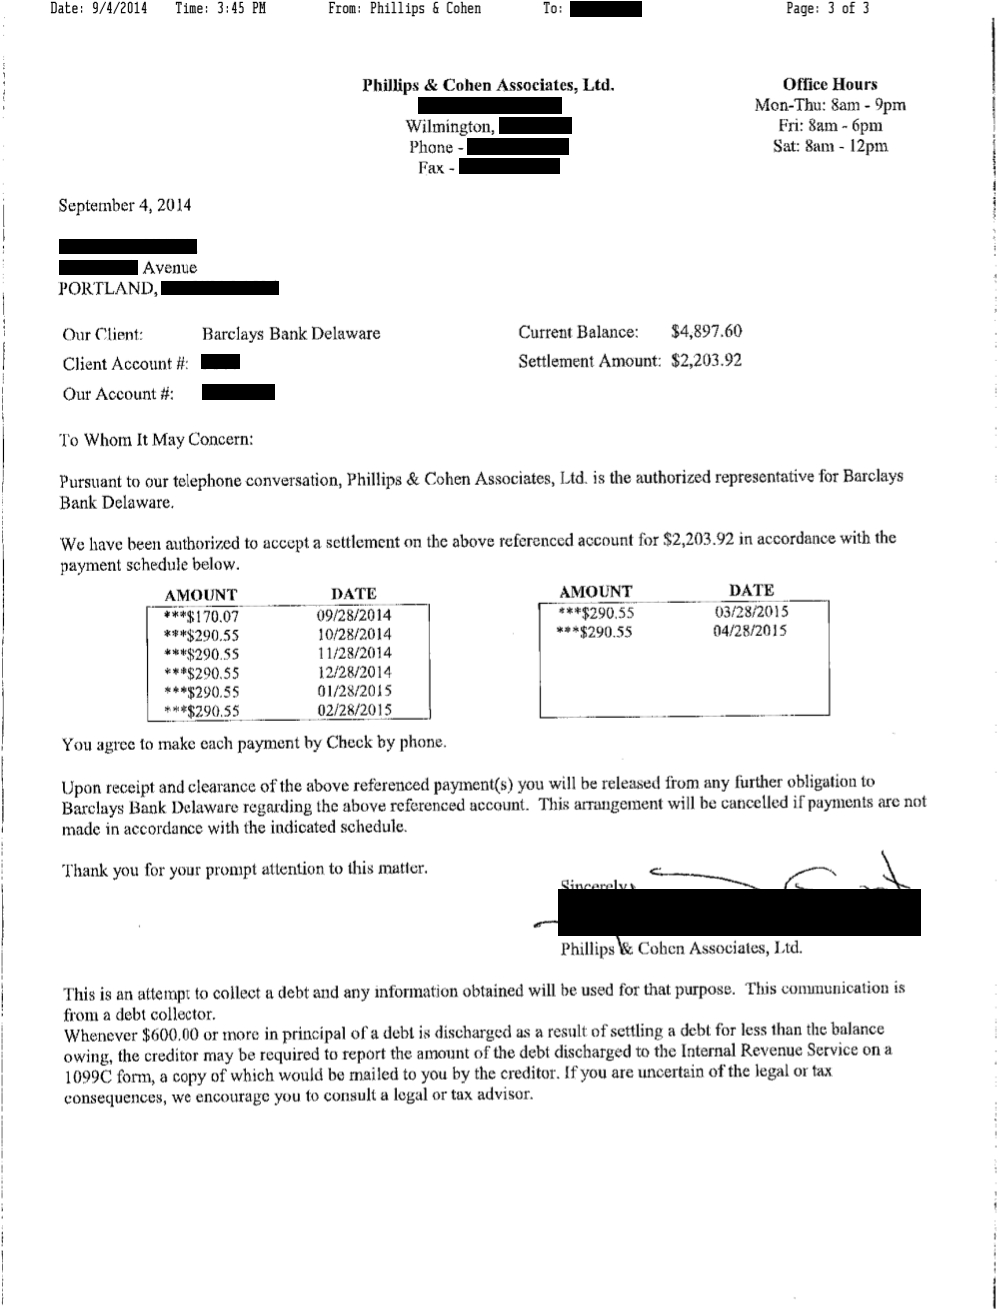 Client EP1 from OR saved $8,655